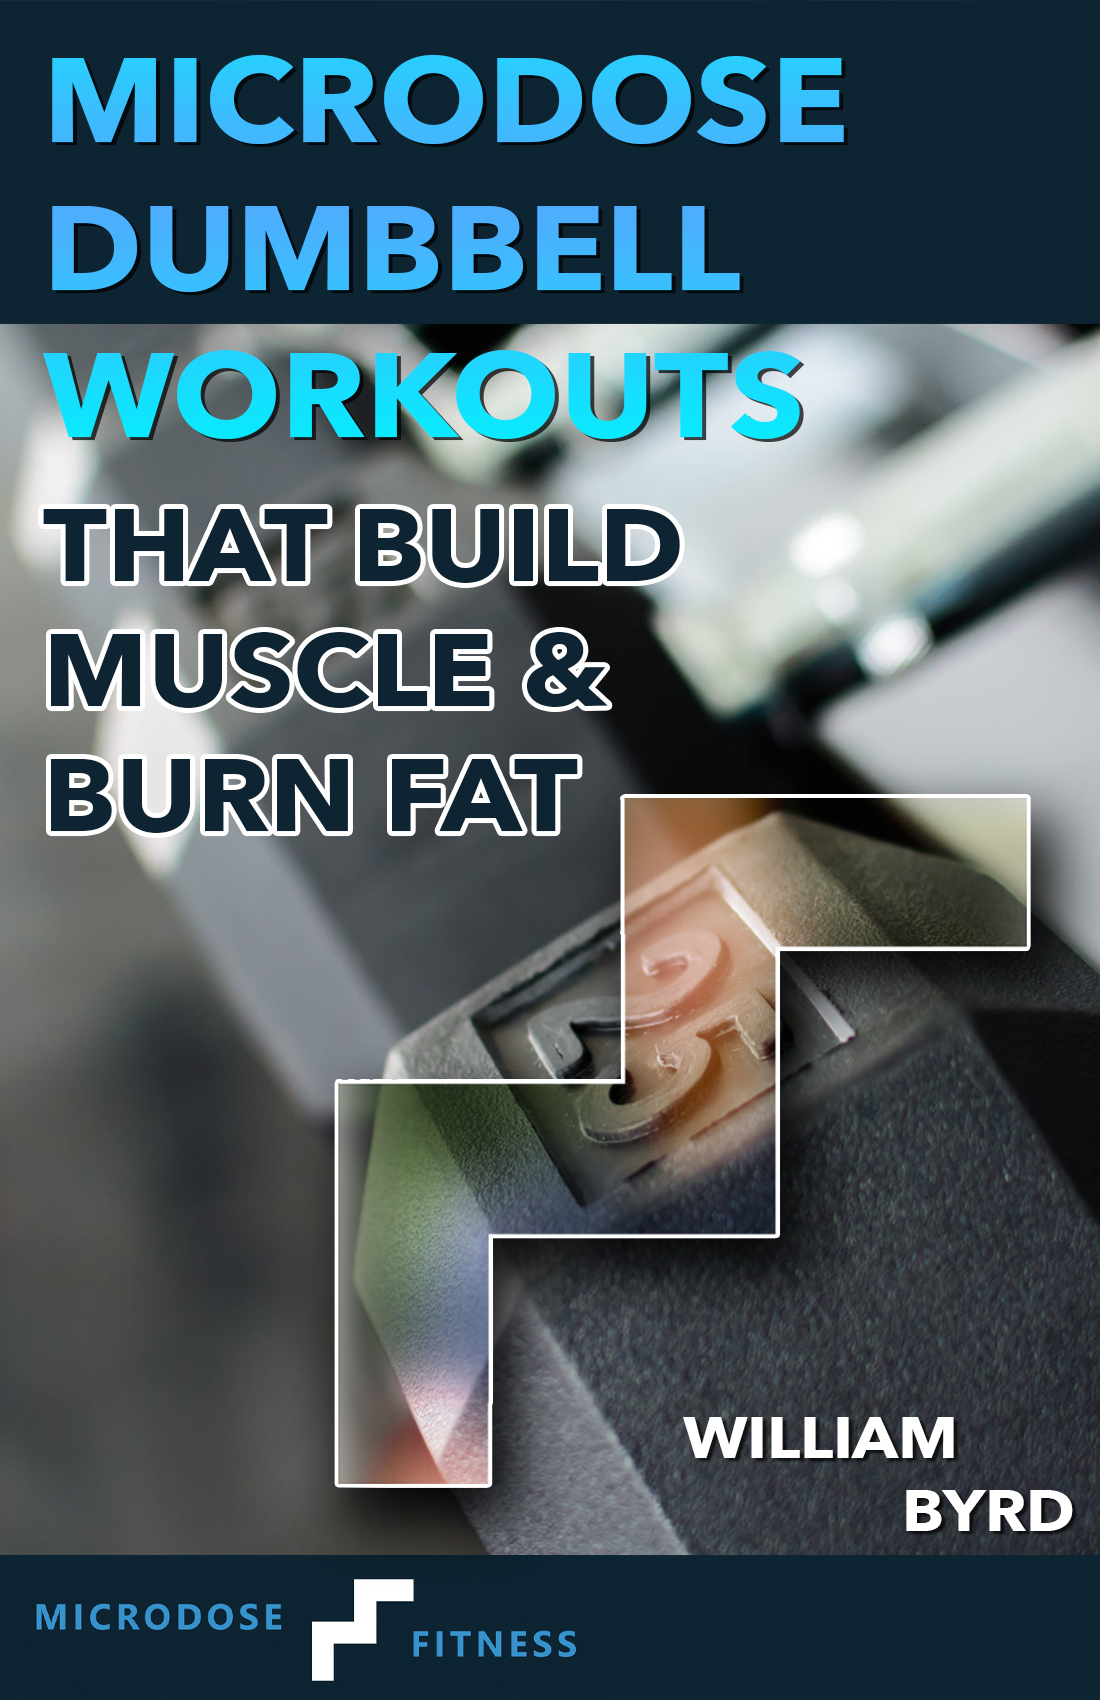 Microdose Dumbbell Workouts That Build Muscle & Burn Fat